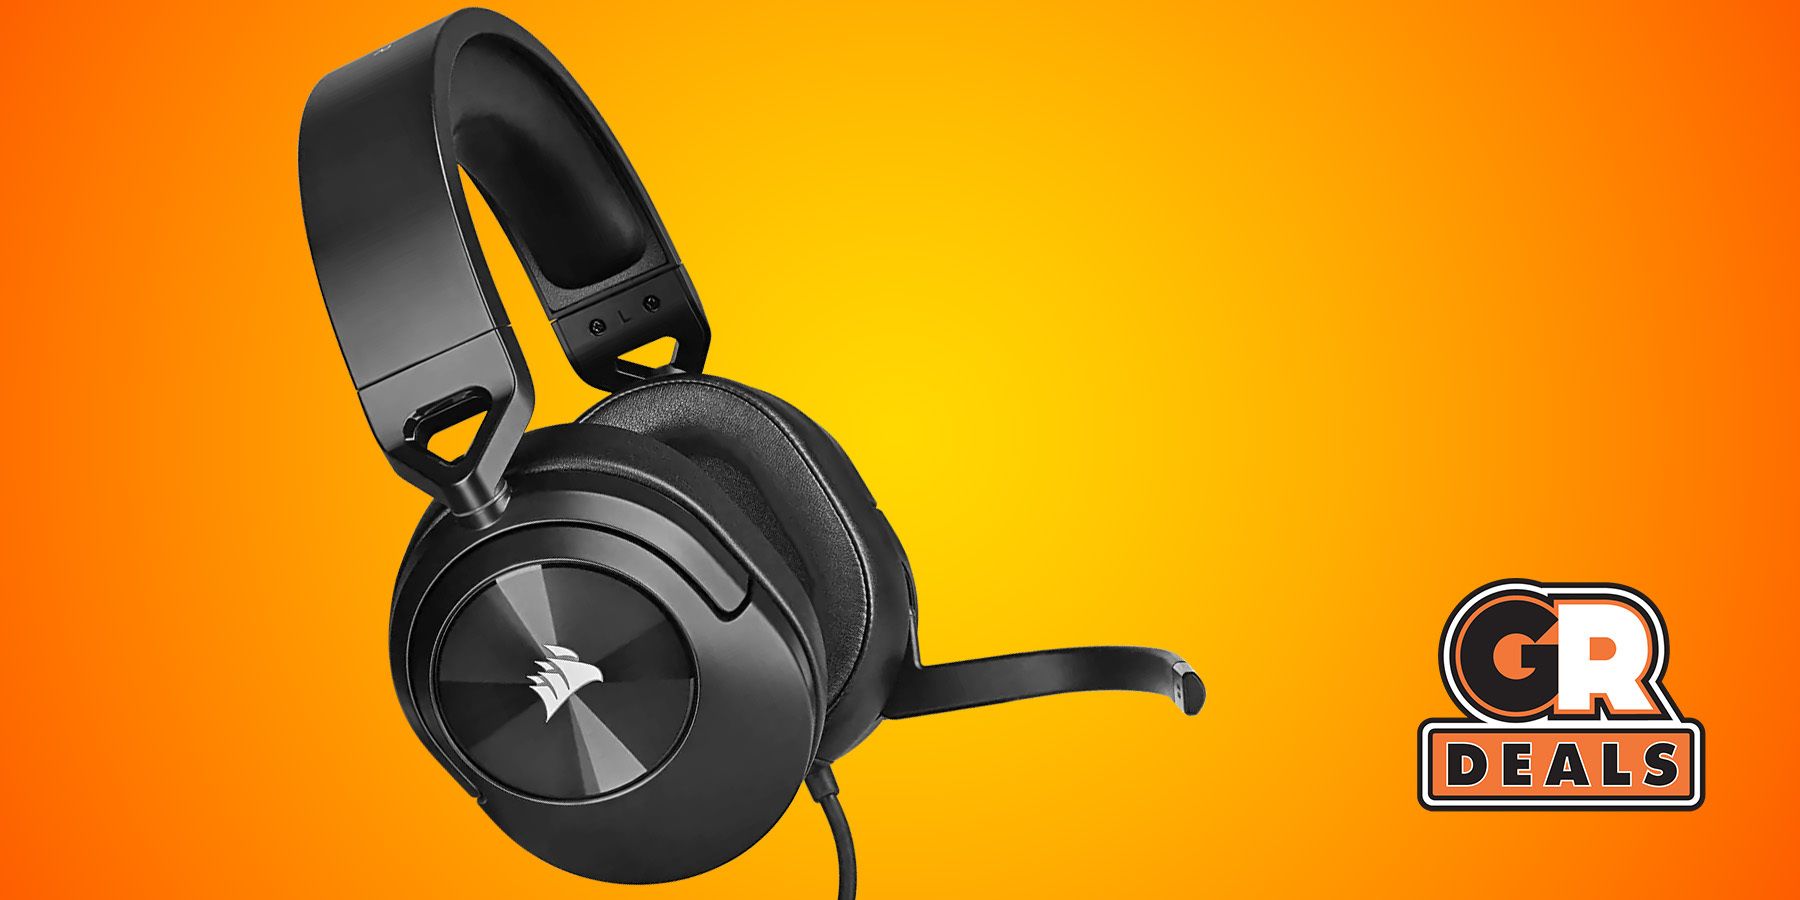 Get the Corsair HS55 Surround Gaming Headset for only $55.99